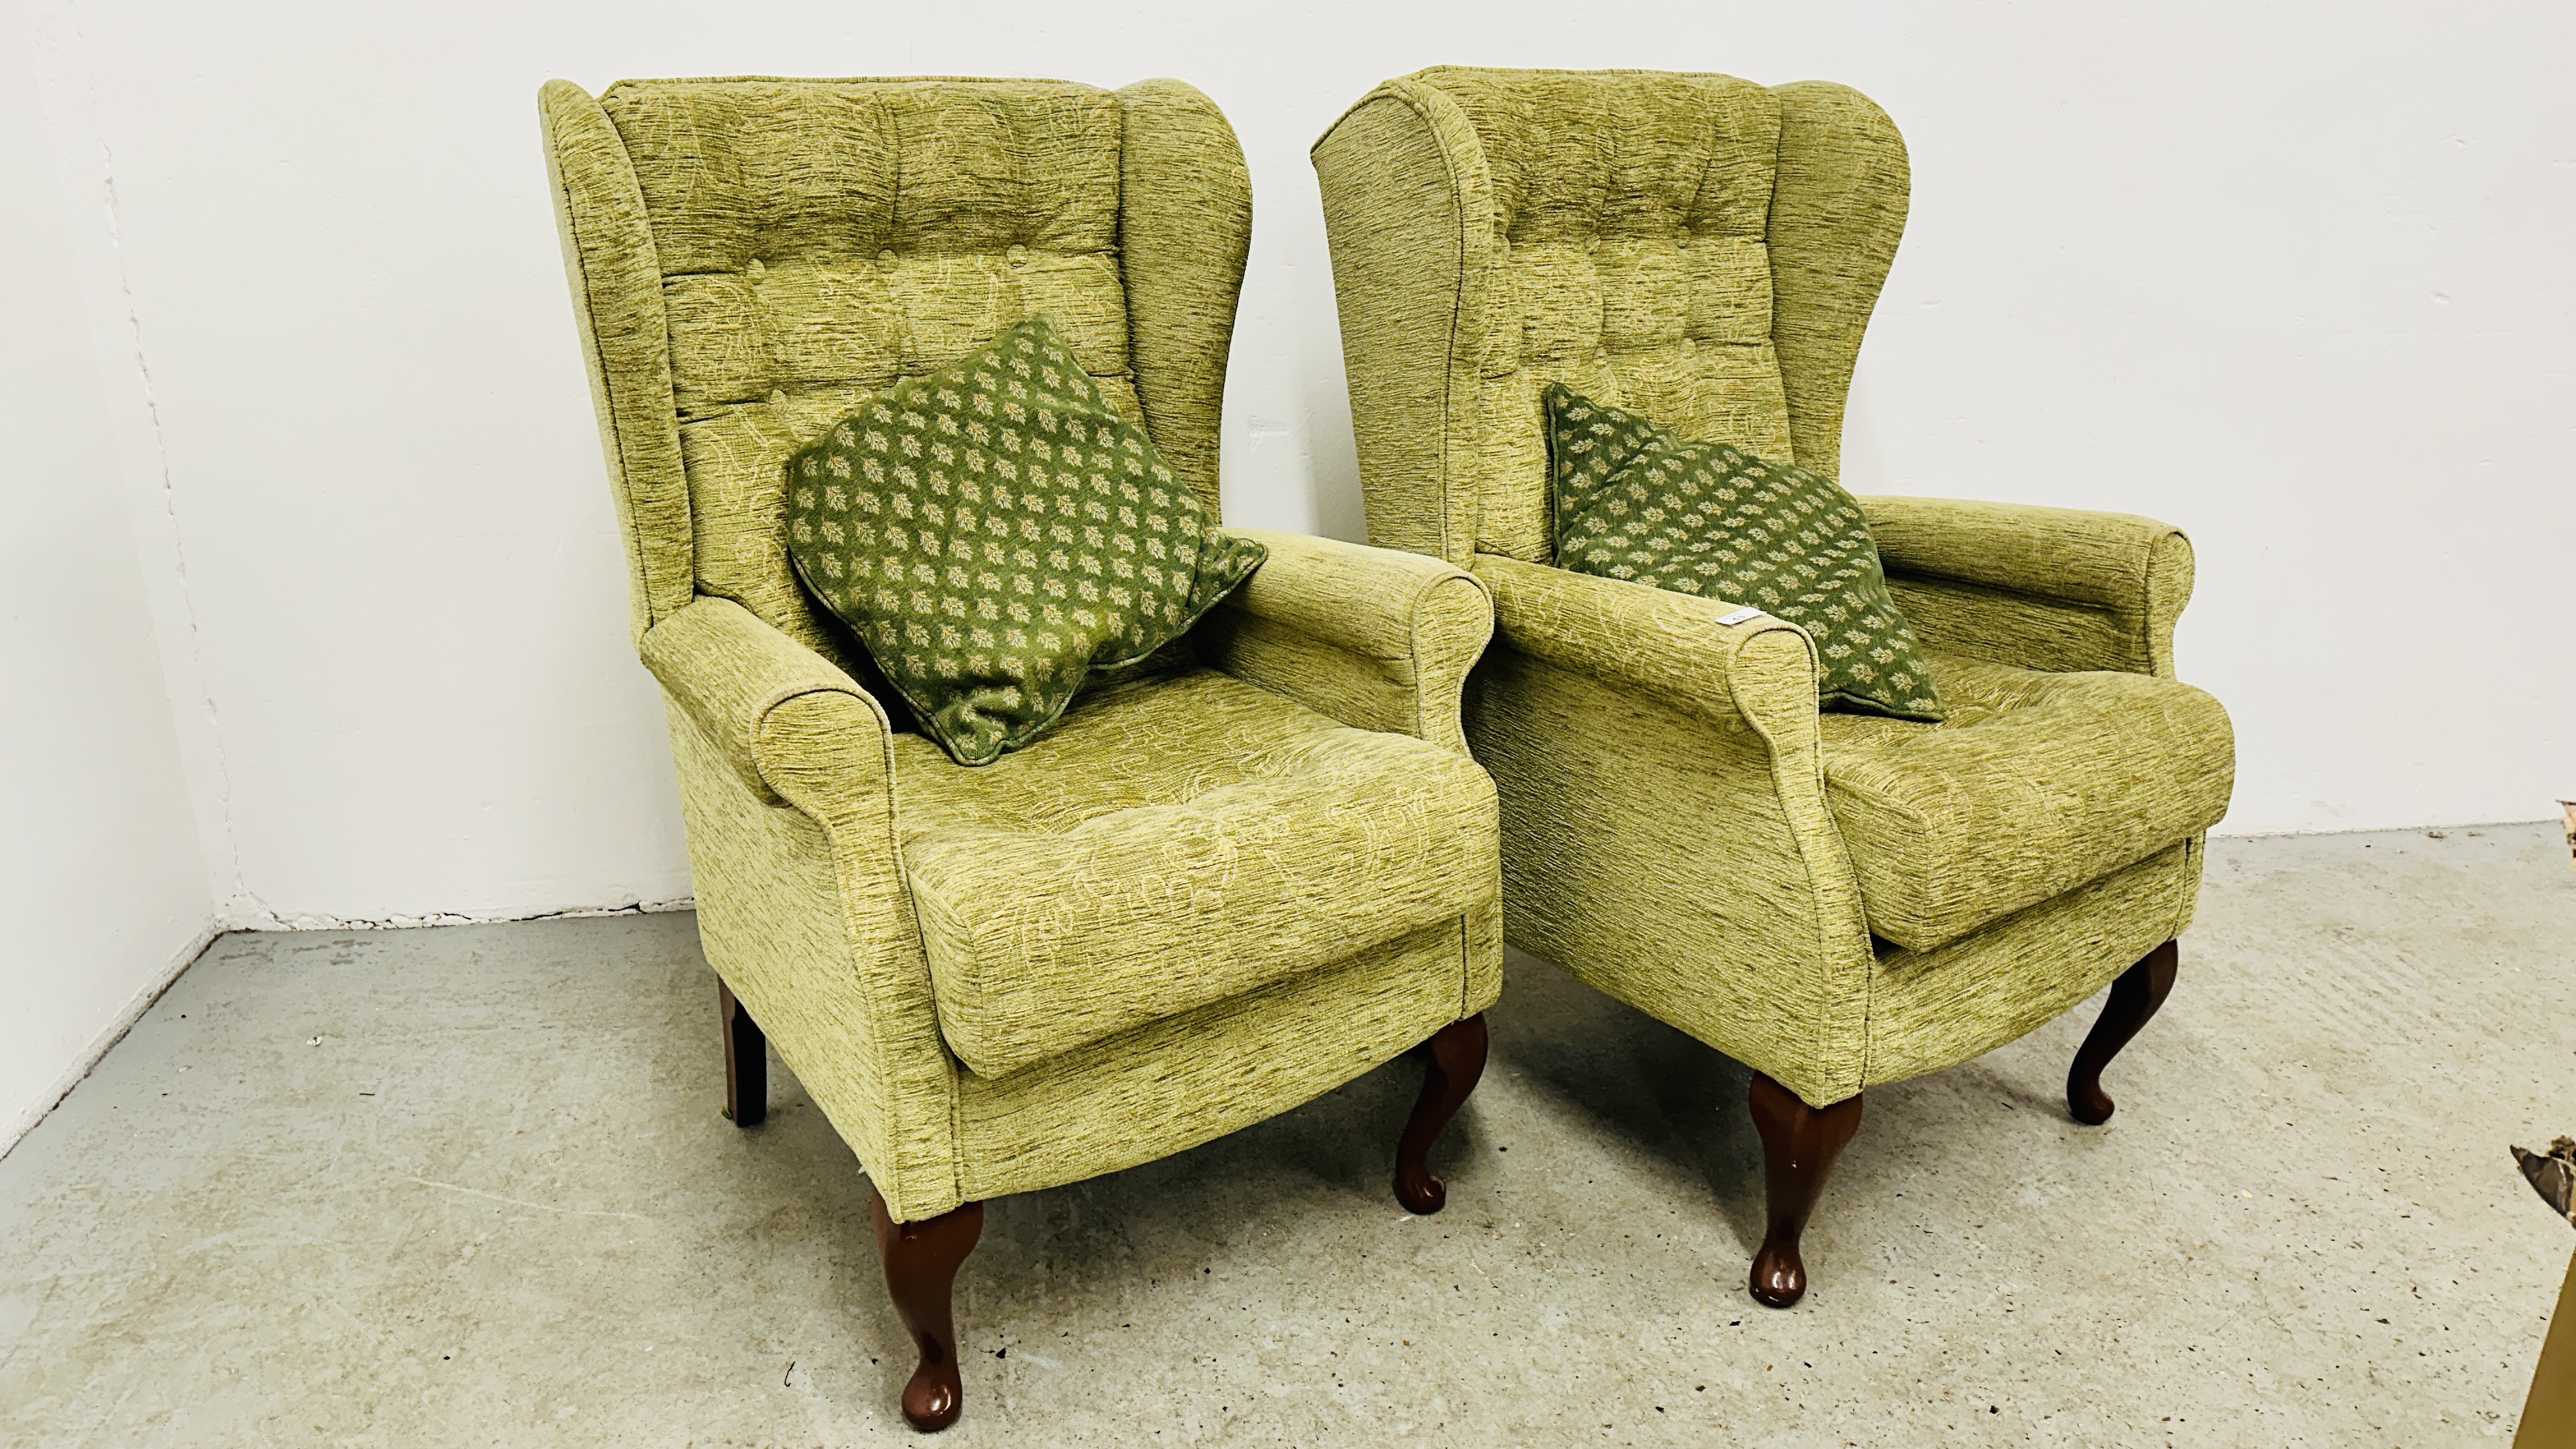 A PAIR OF SHERBORNE GREEN UPHOLSTERED WINGED EASY CHAIRS.